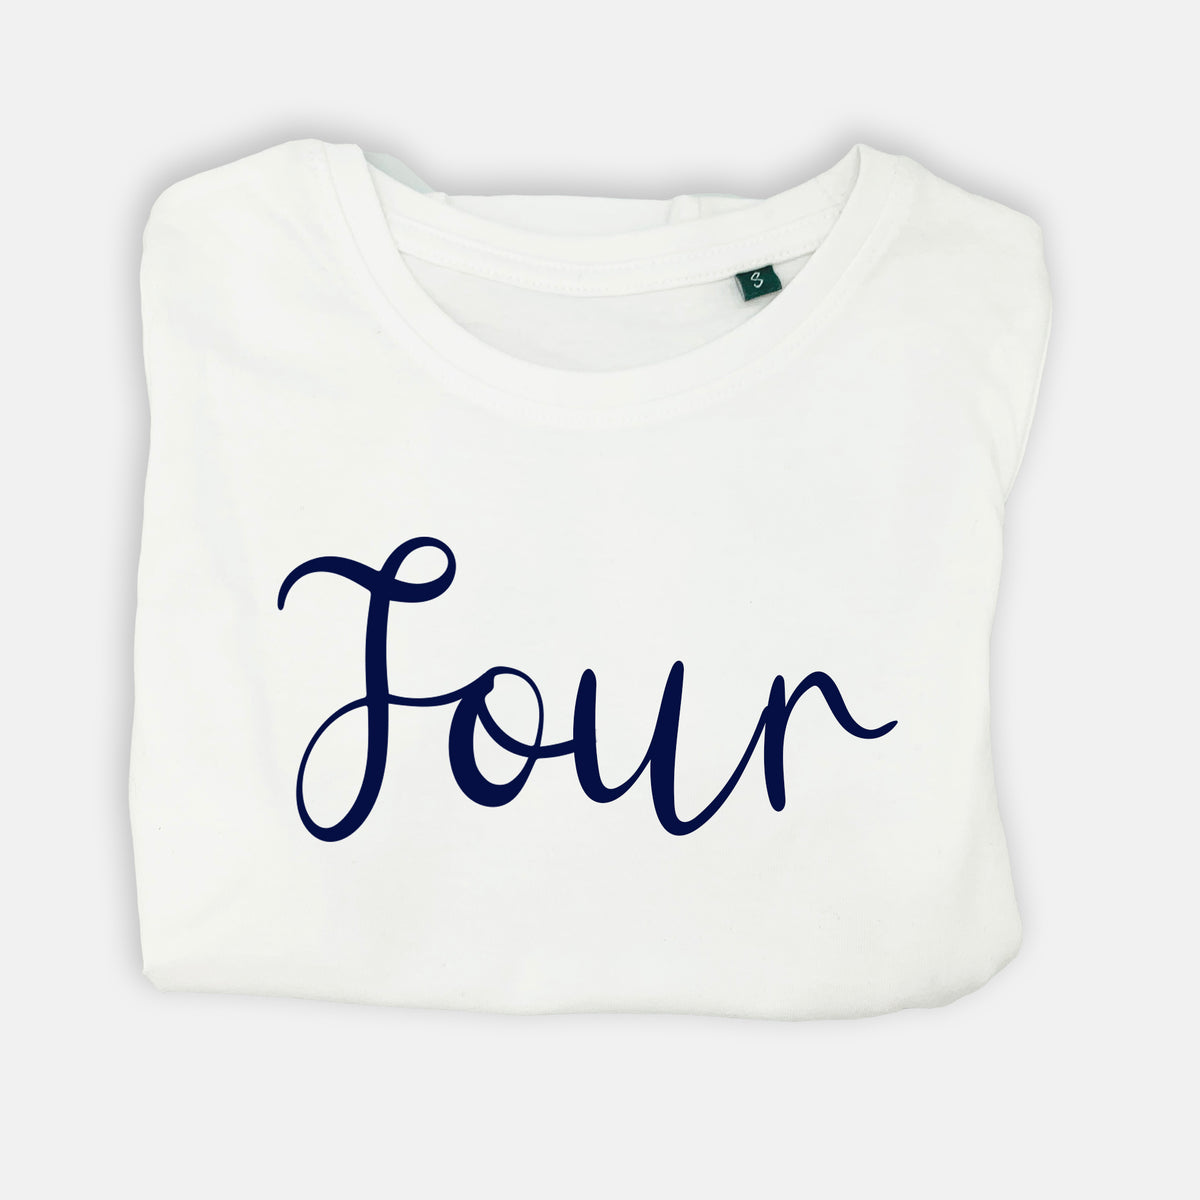 Milestone FOUR T-shirt - The Perfect Birthday outfit for a FOUR year old